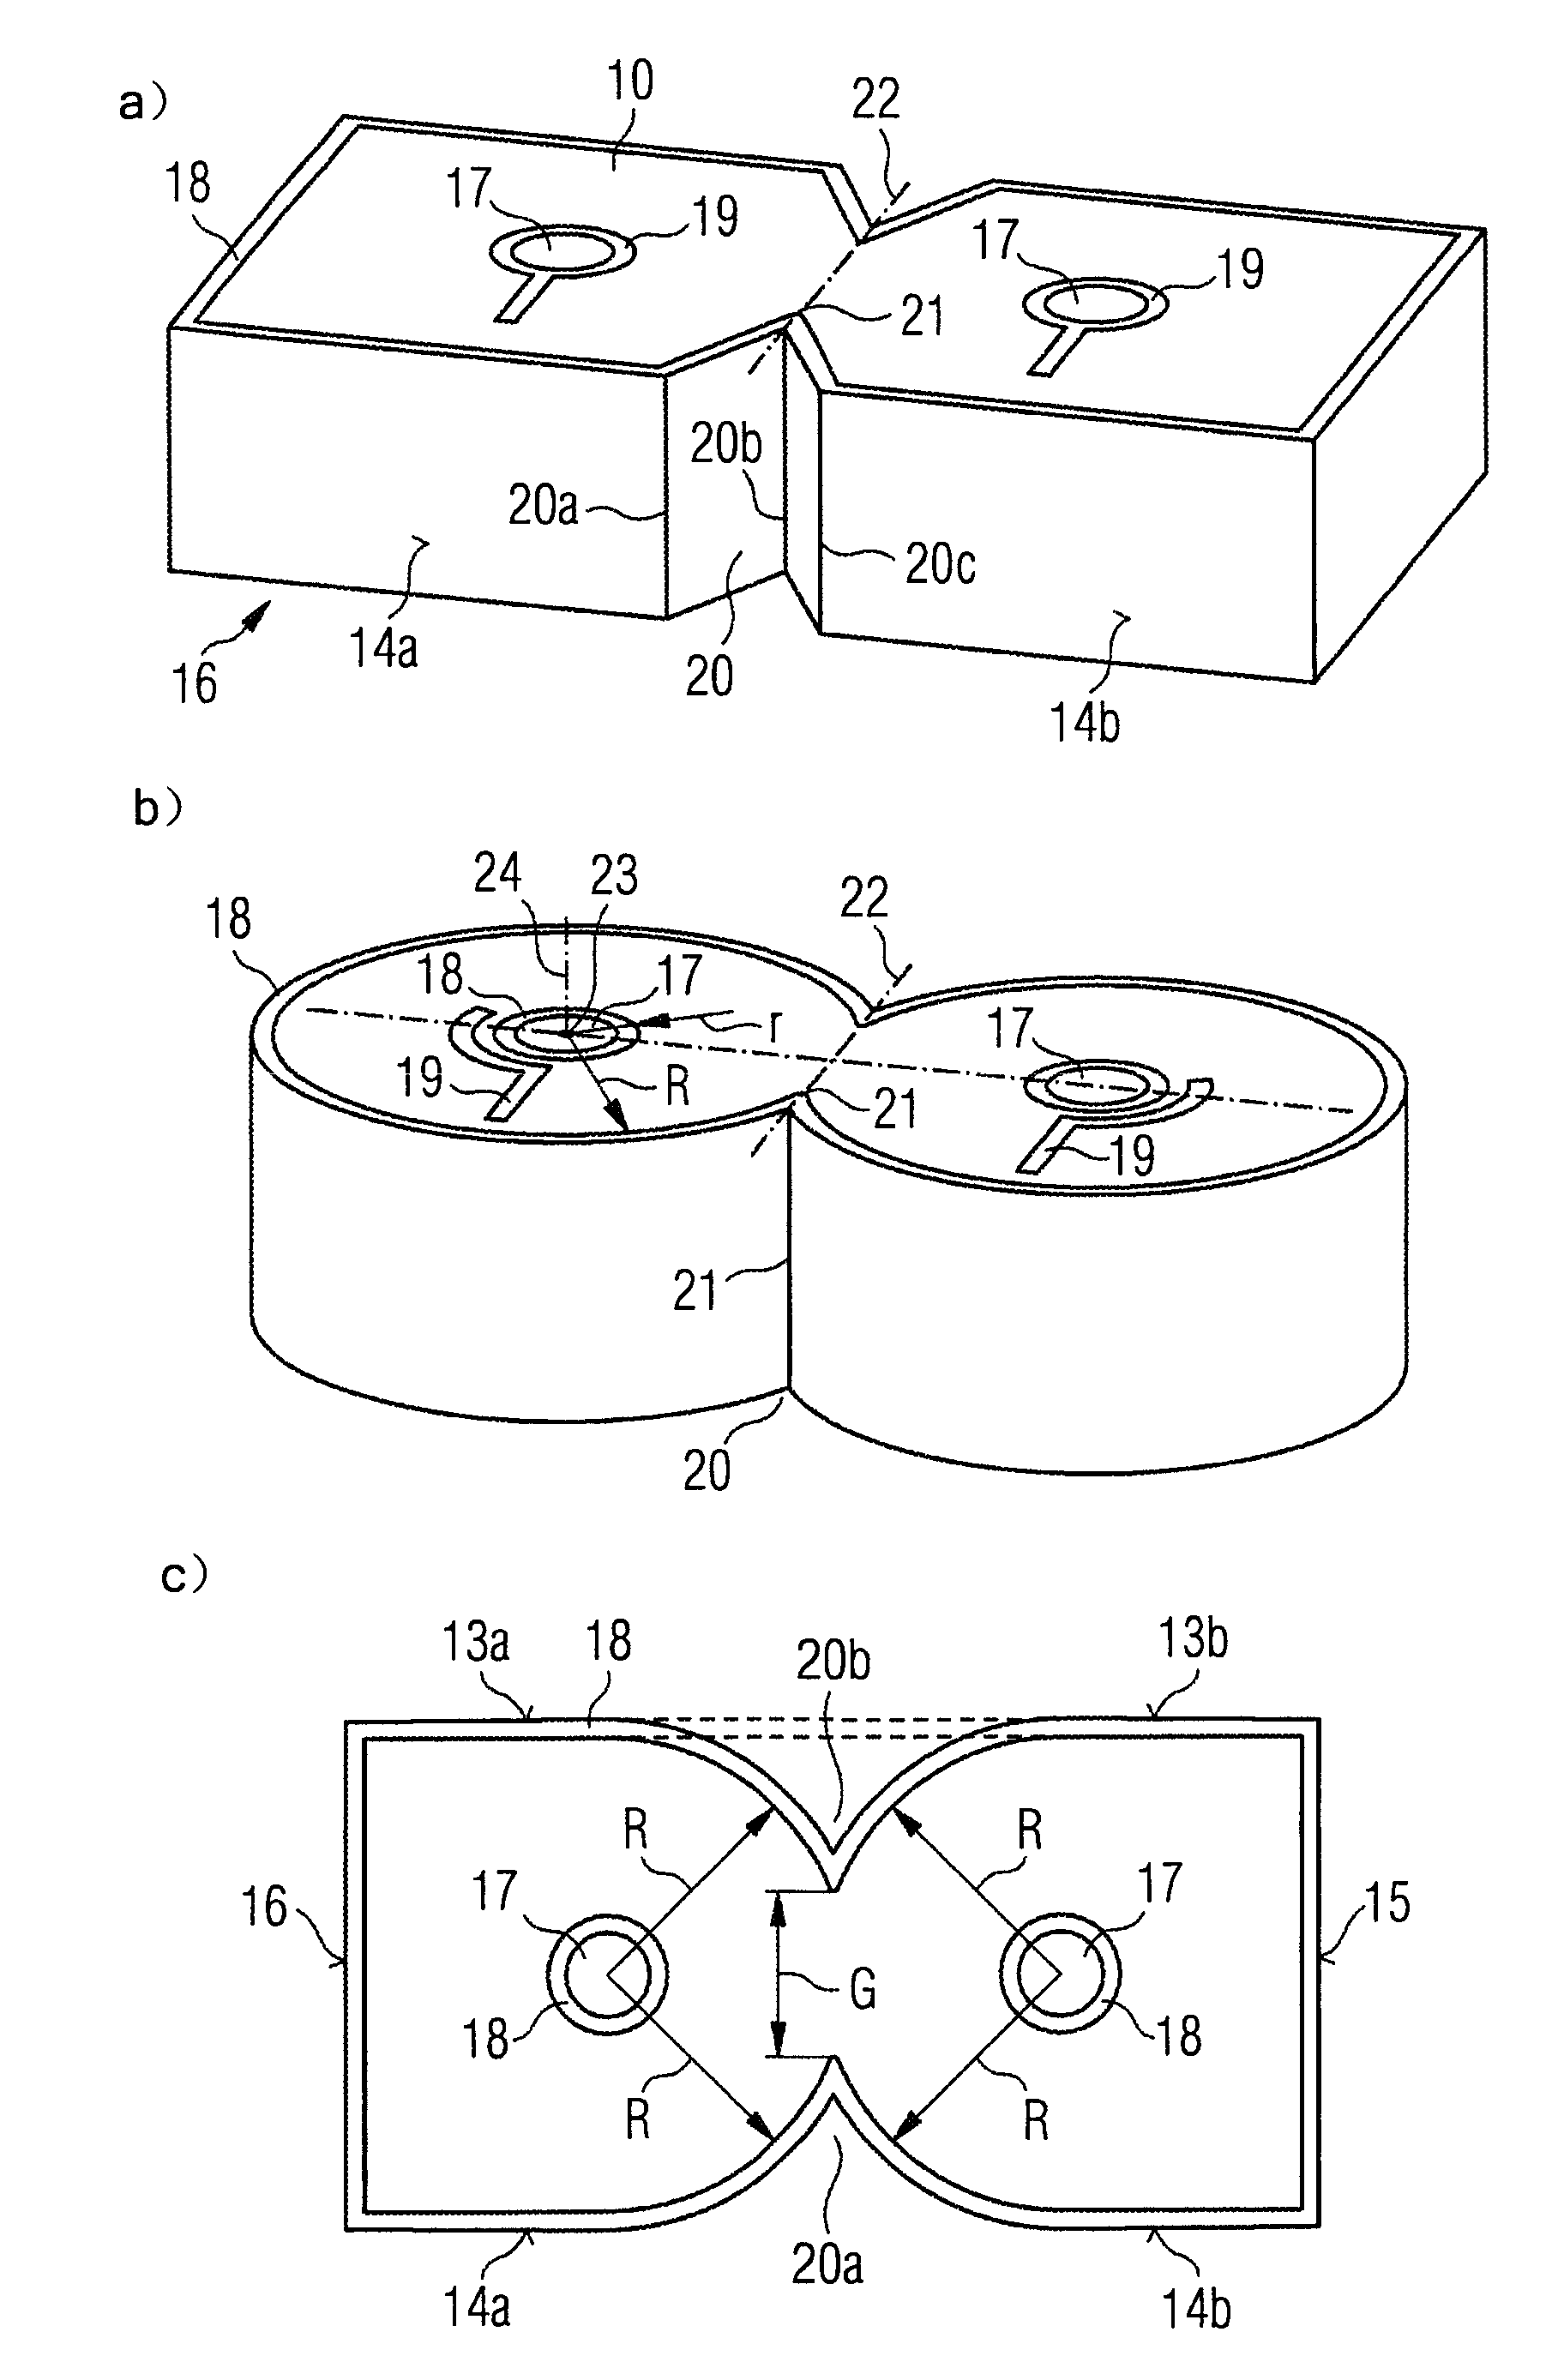 Filter for electronic signals and method for manufacturing it